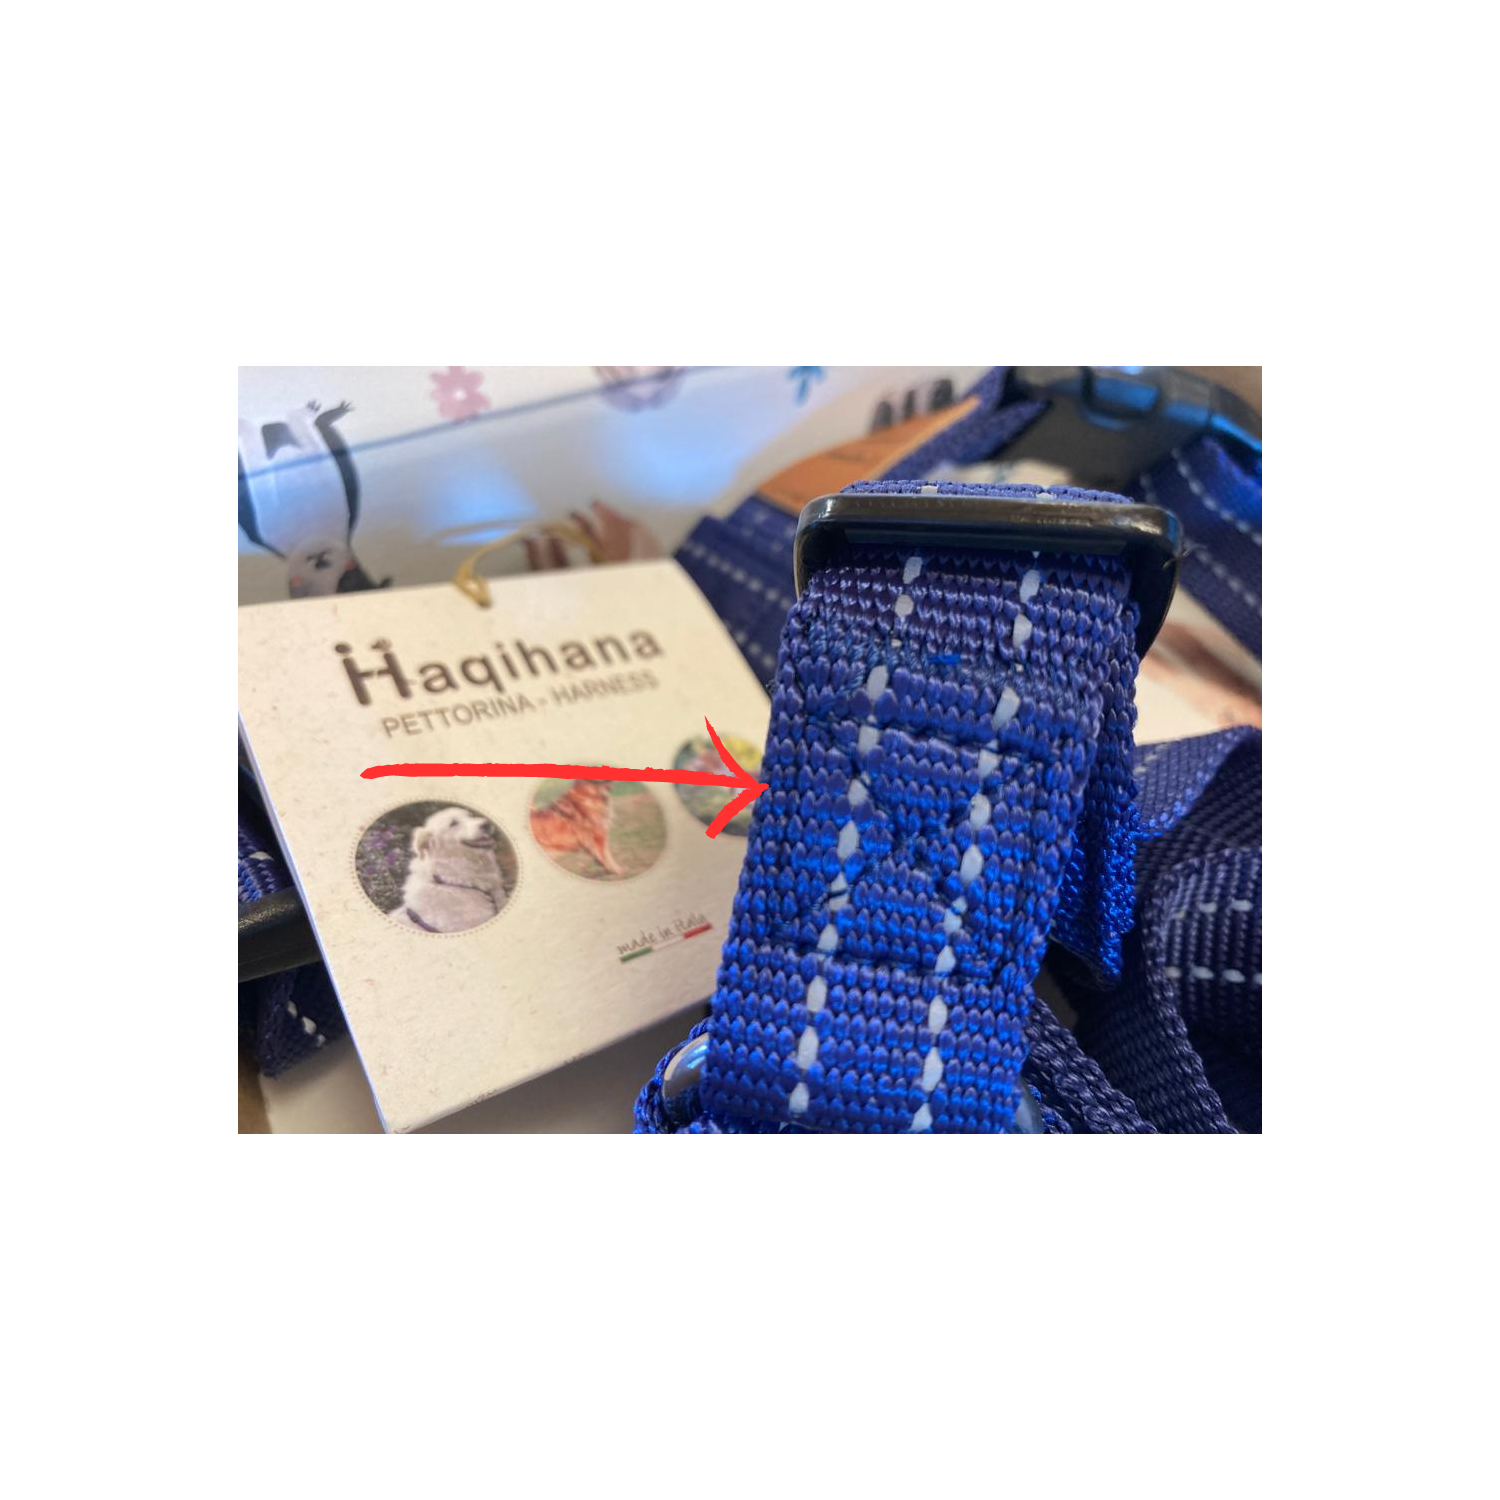 Blue High Visibility Harness - Size S - Stitching defect